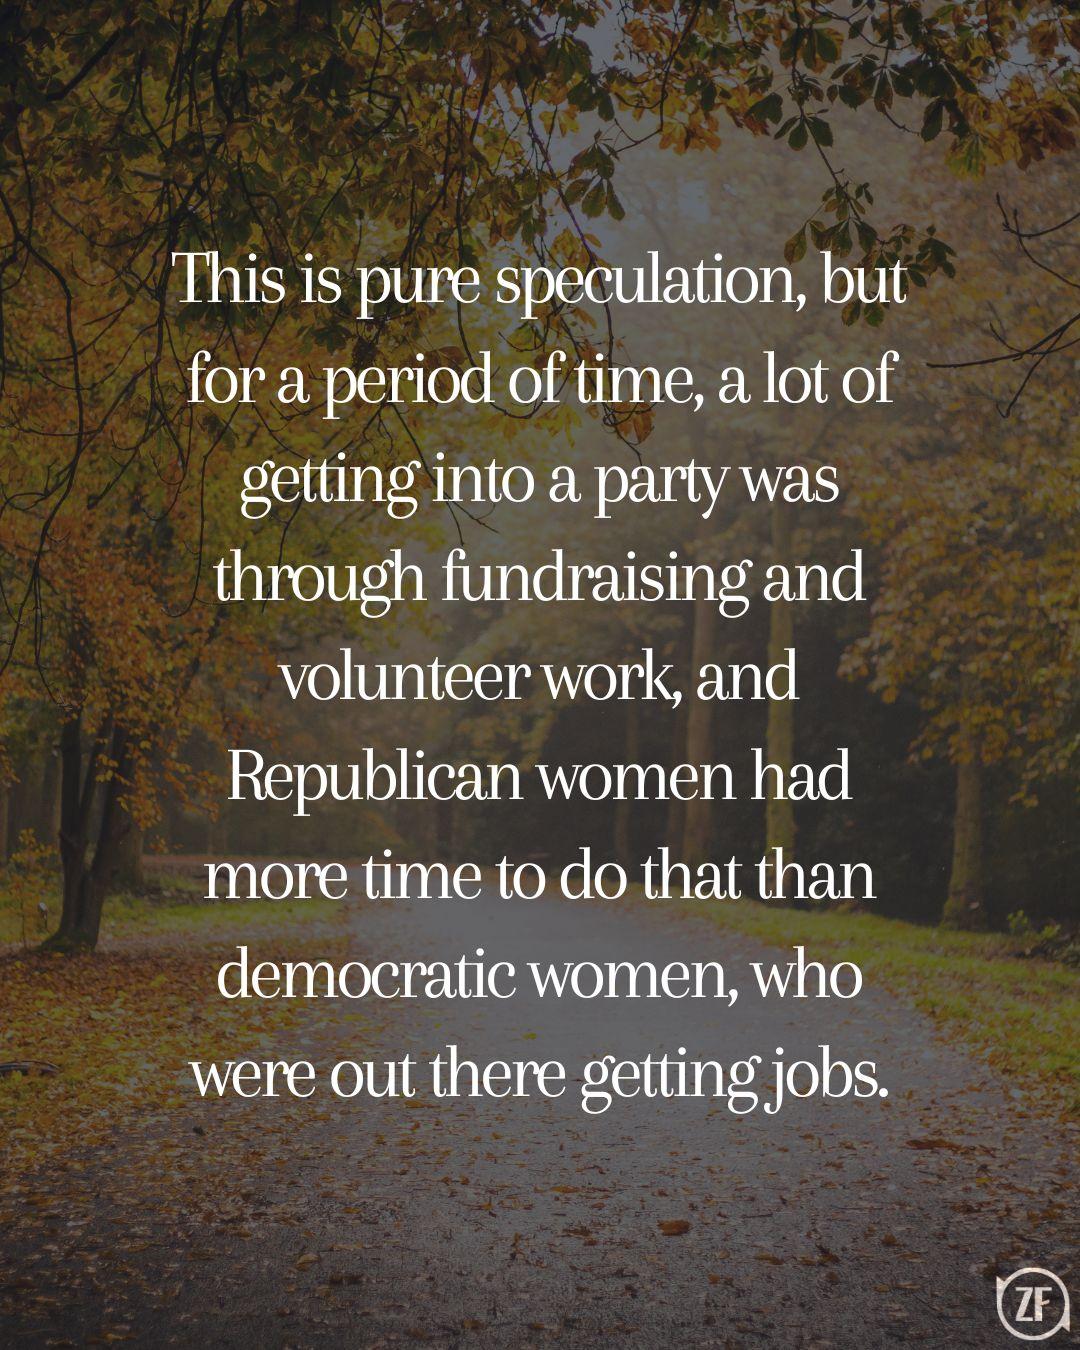 This is pure speculation, but for a period of time, a lot of getting into a party was through fundraising and volunteer work, and Republican women had more time to do that than democratic women, who were out there getting jobs.